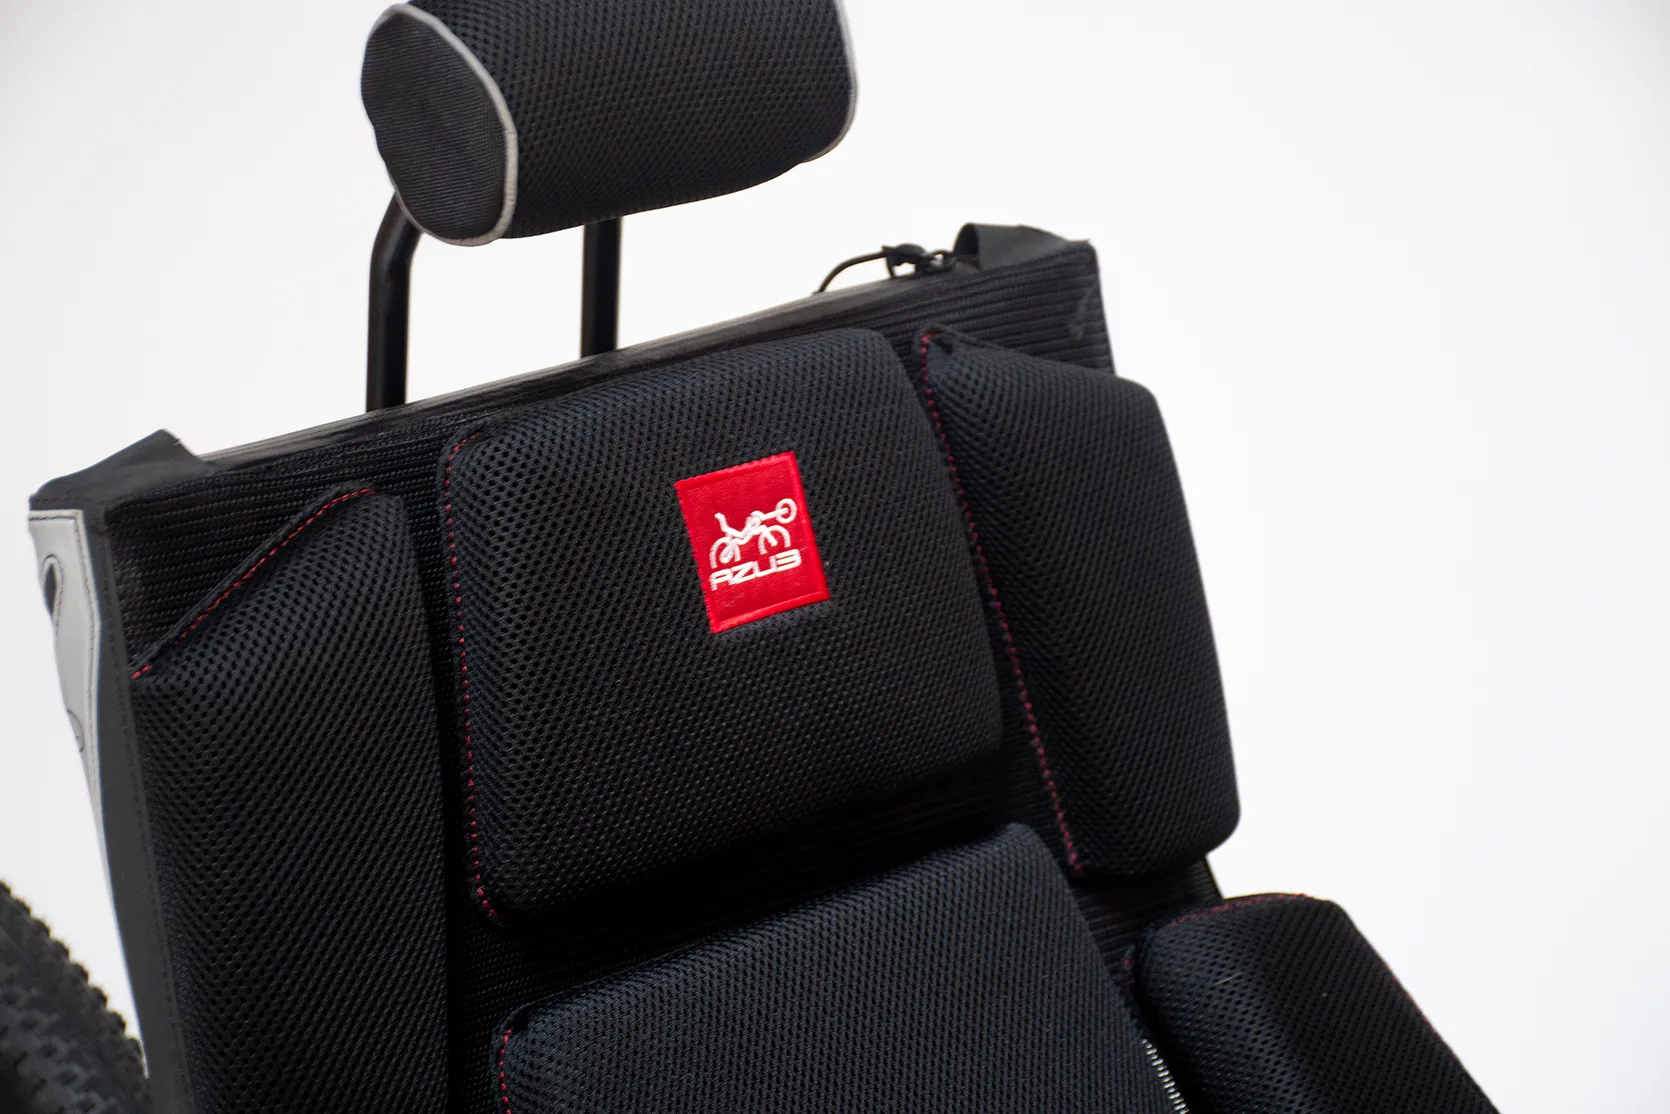 Azub Ti-FLY X black seat with red logo tag positioned below the headrest that reads "AZUB" in white threading